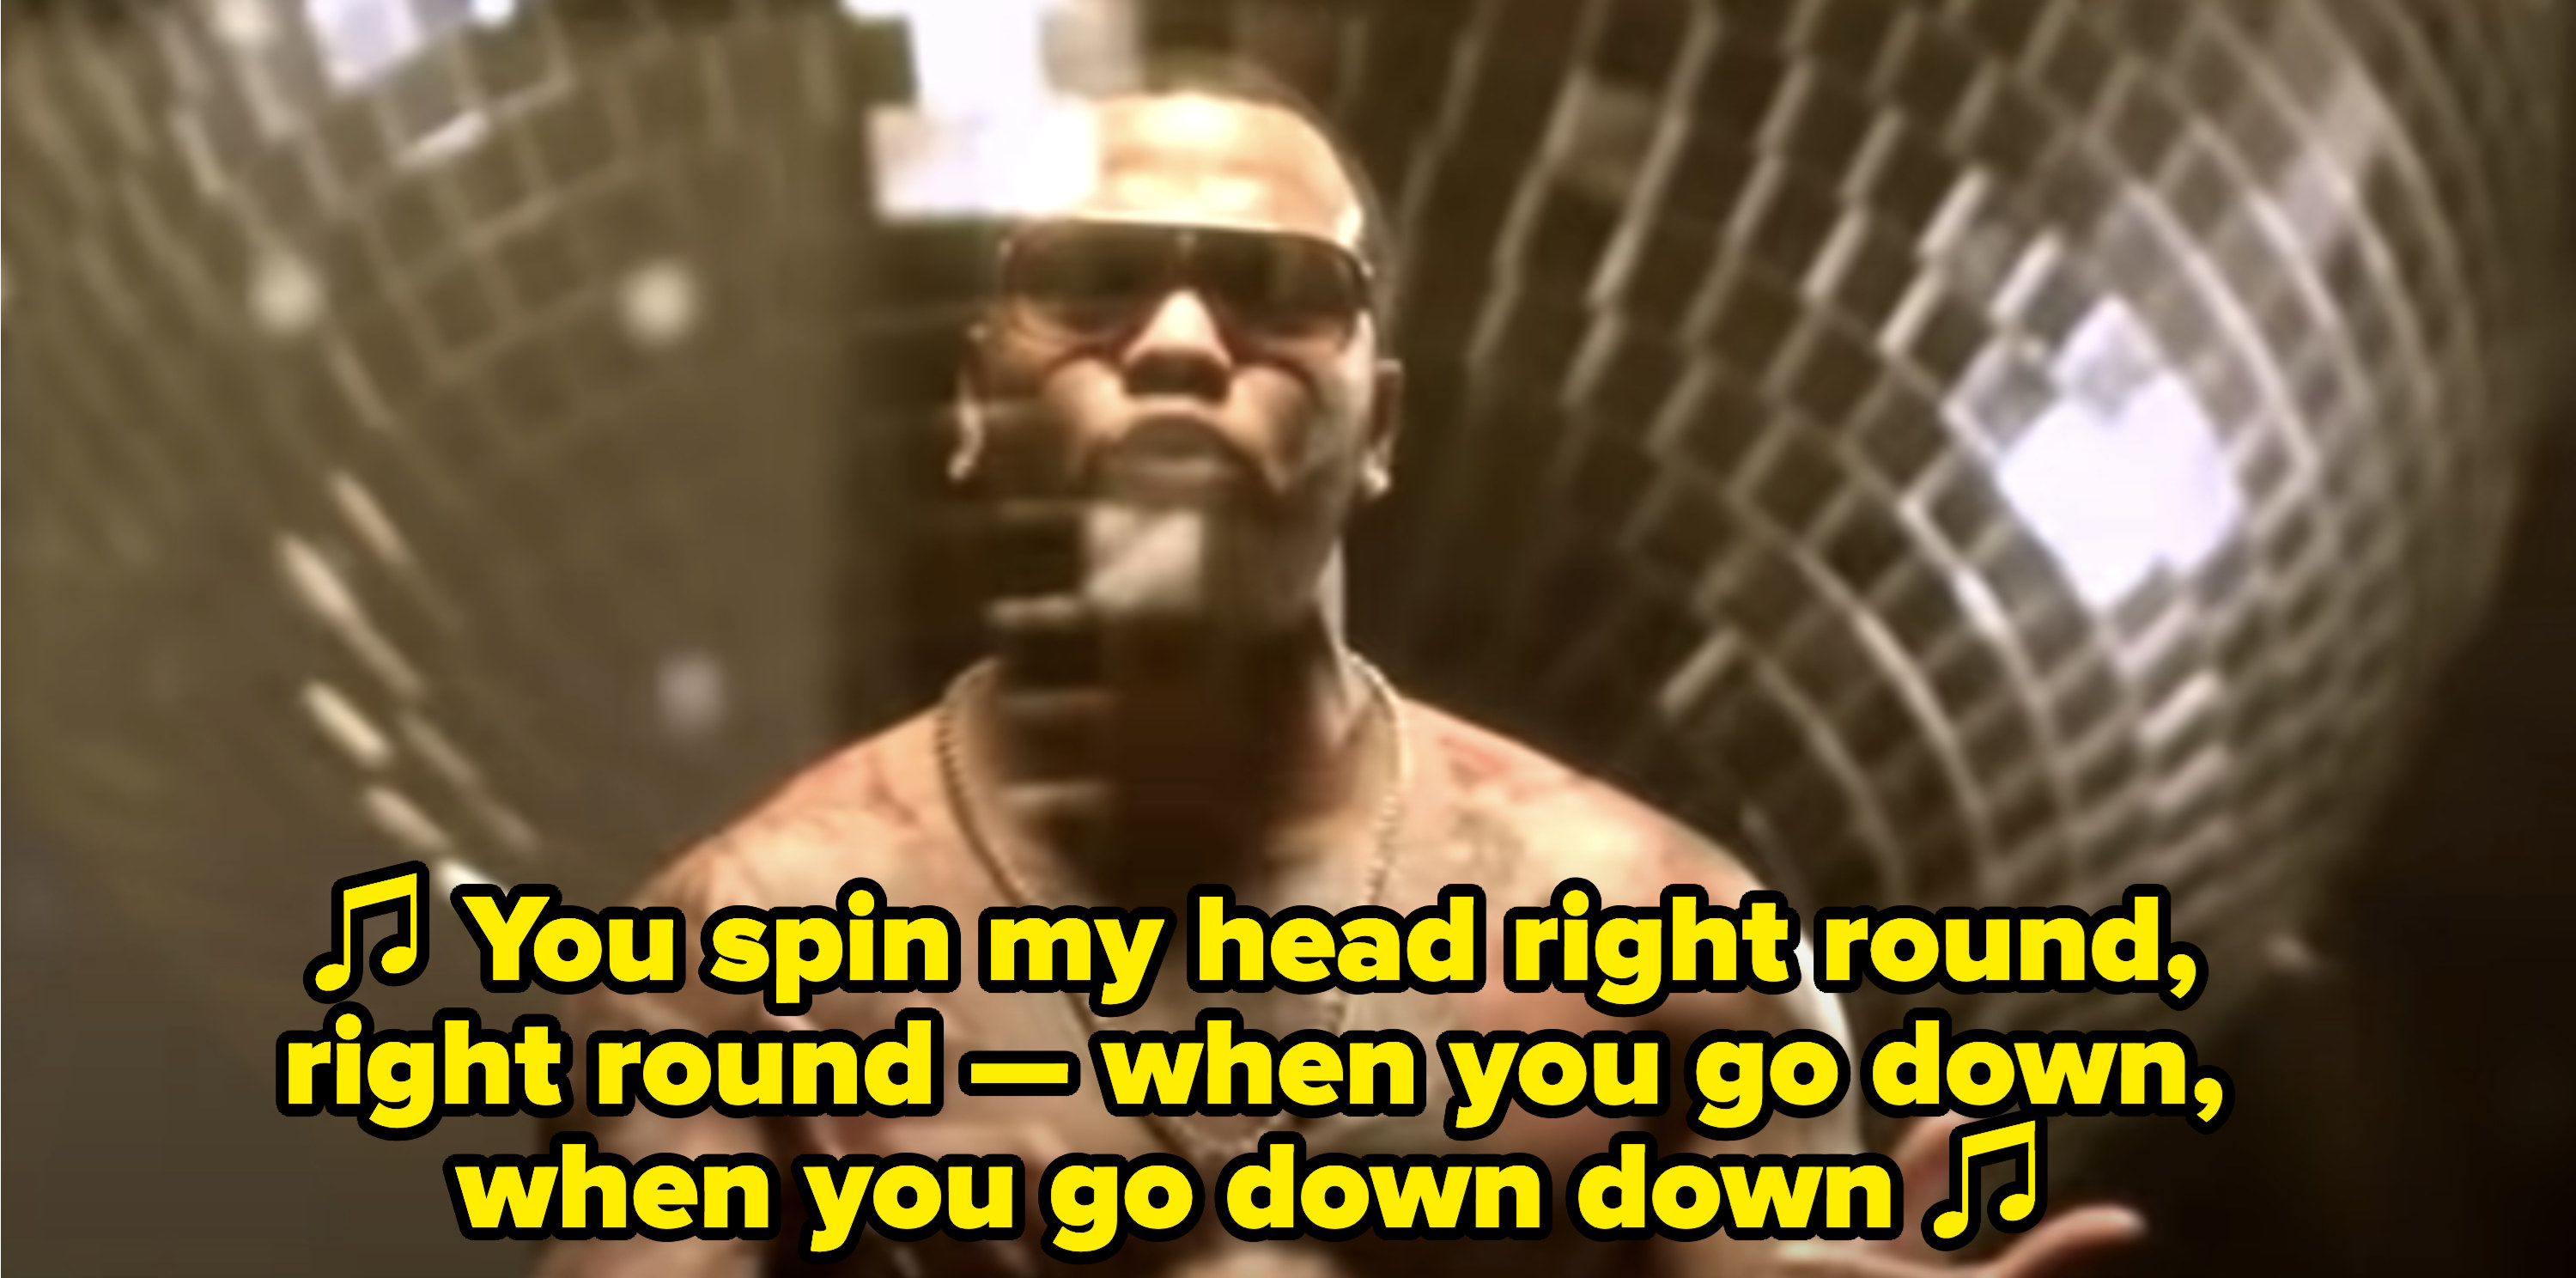 Flo Rida rapping: &quot;You spin my head right round, right round / When you go down, when you go down down&quot;